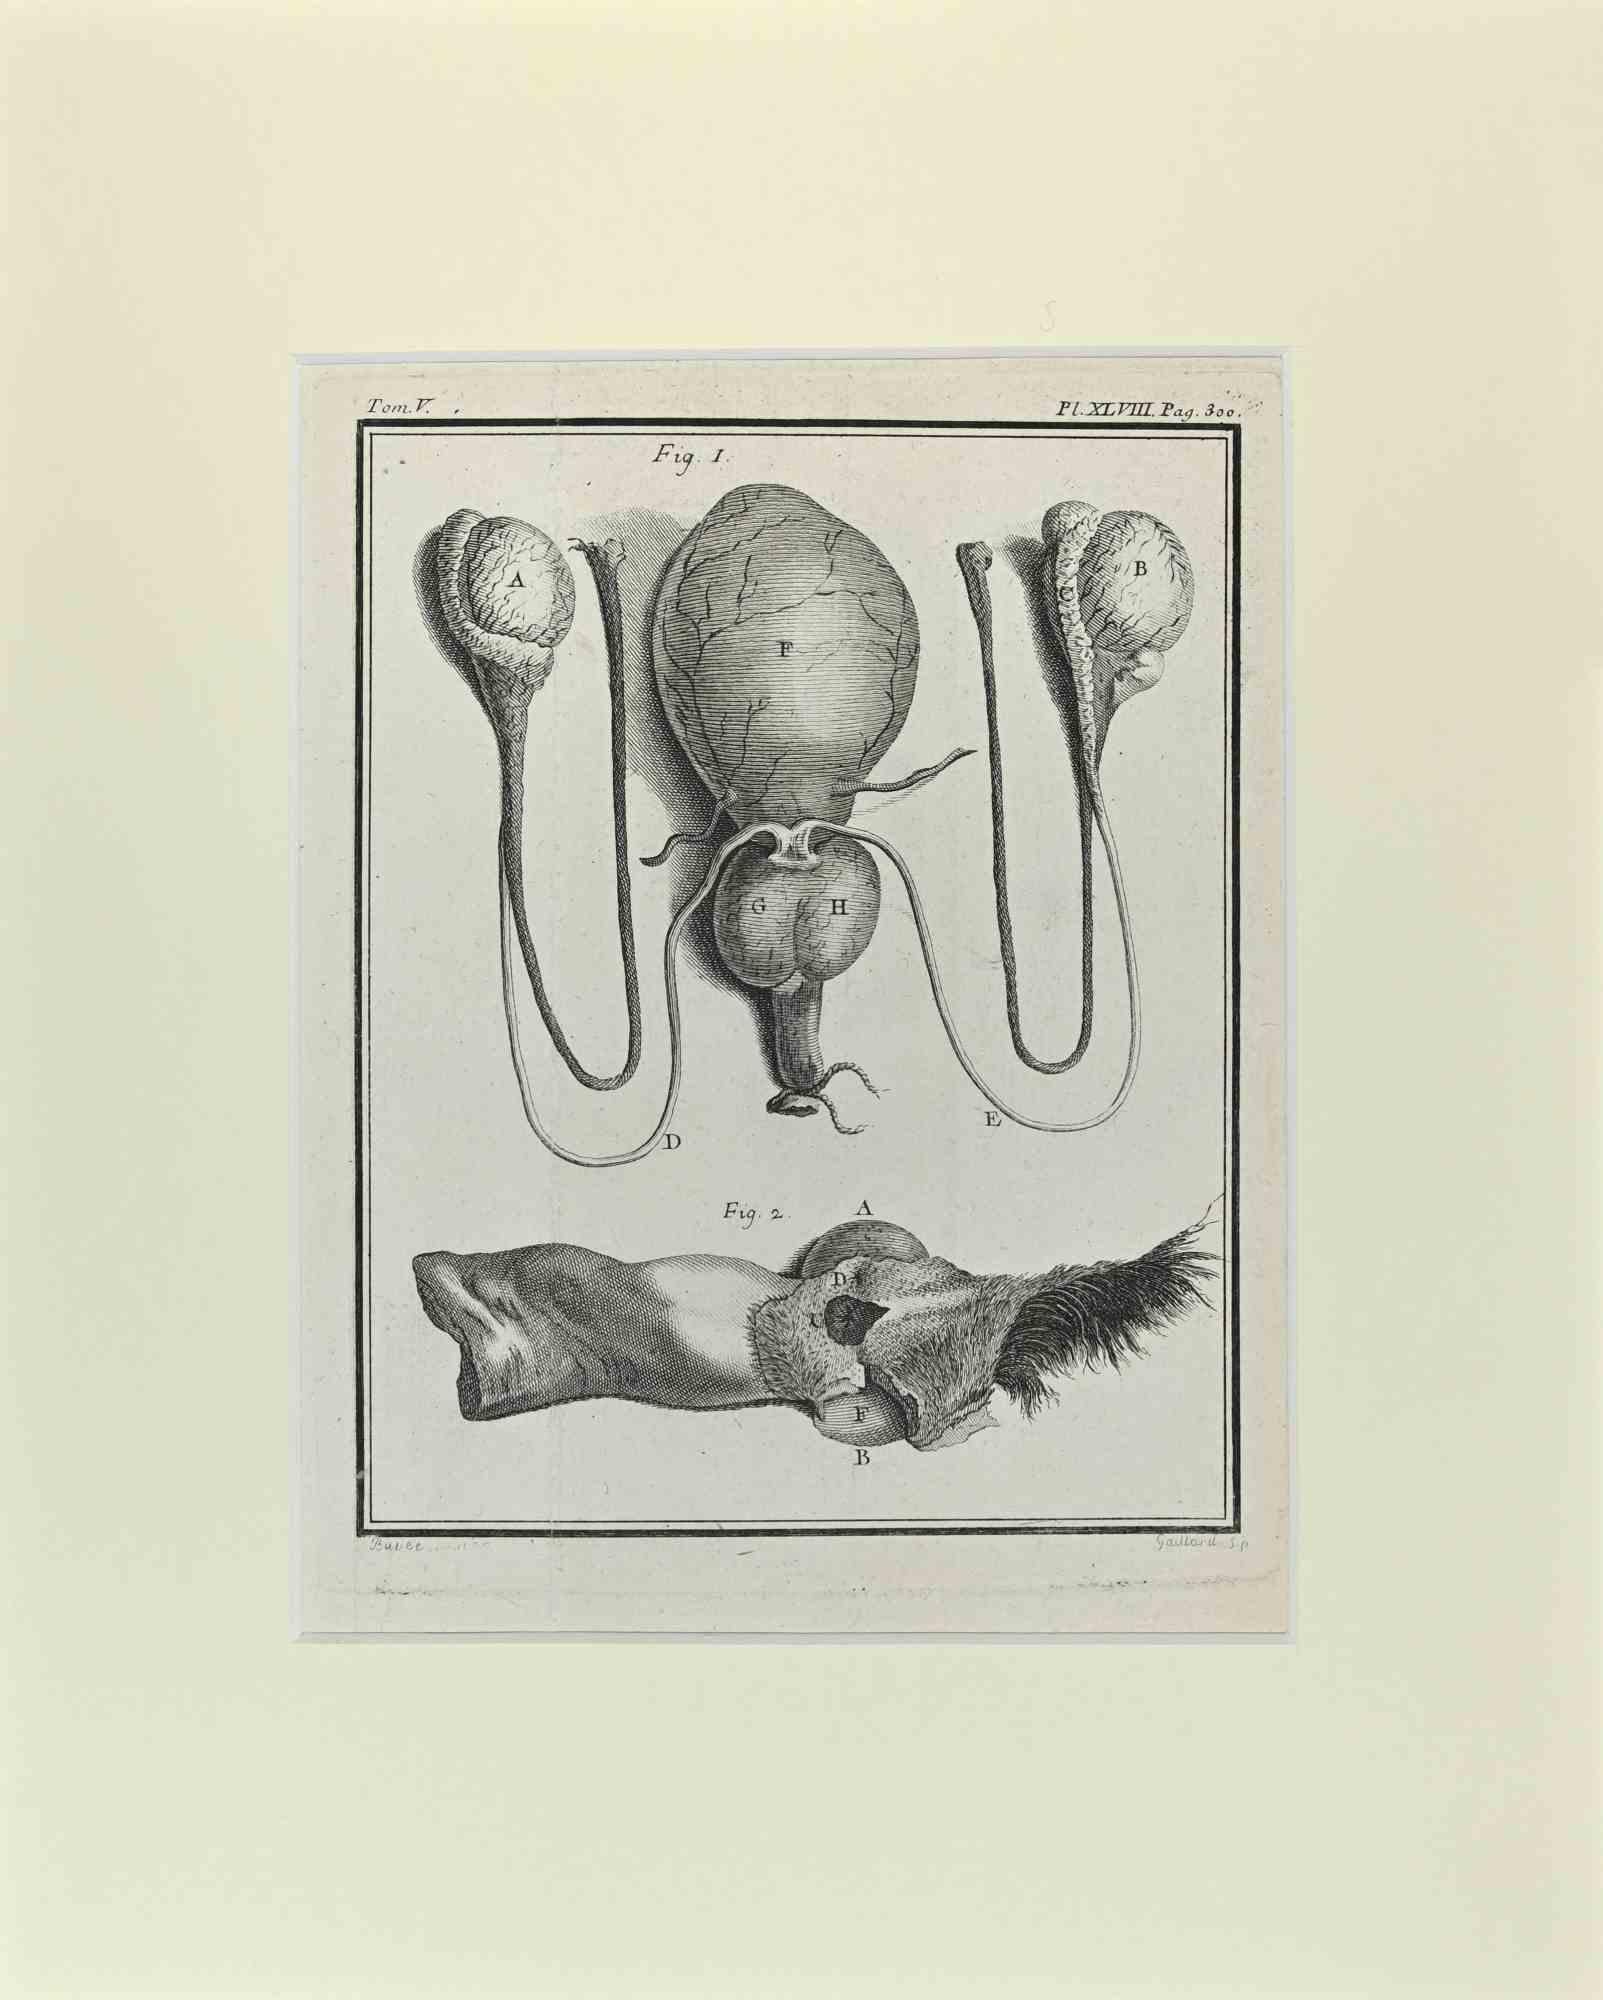 Animal Anatomy is an artwork realized by Buvée l'Américain in 1771.  

Etching B./W. print  on ivory paper. Signed on  plate on the lower left margin.

The work is glued on cardboard. Total dimensions: 35x28 cm.

The artwork belongs to the suite